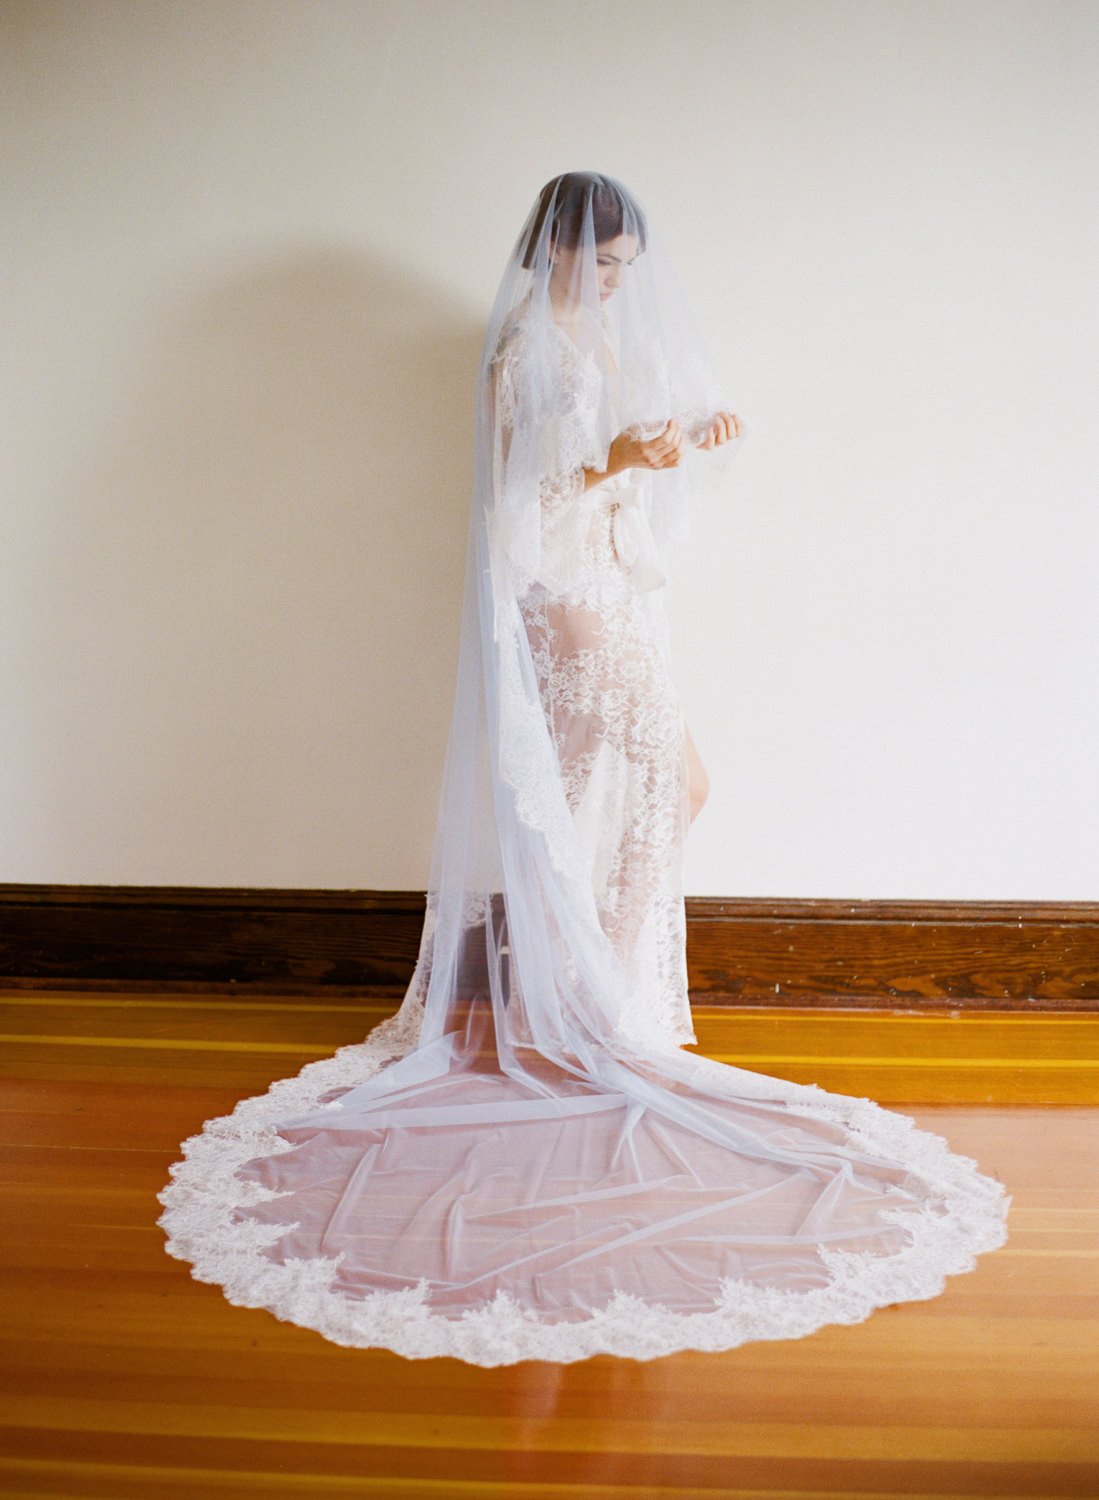 Elegant Cathedral Wedding Veil,long Lace Veil,floral Cathedral